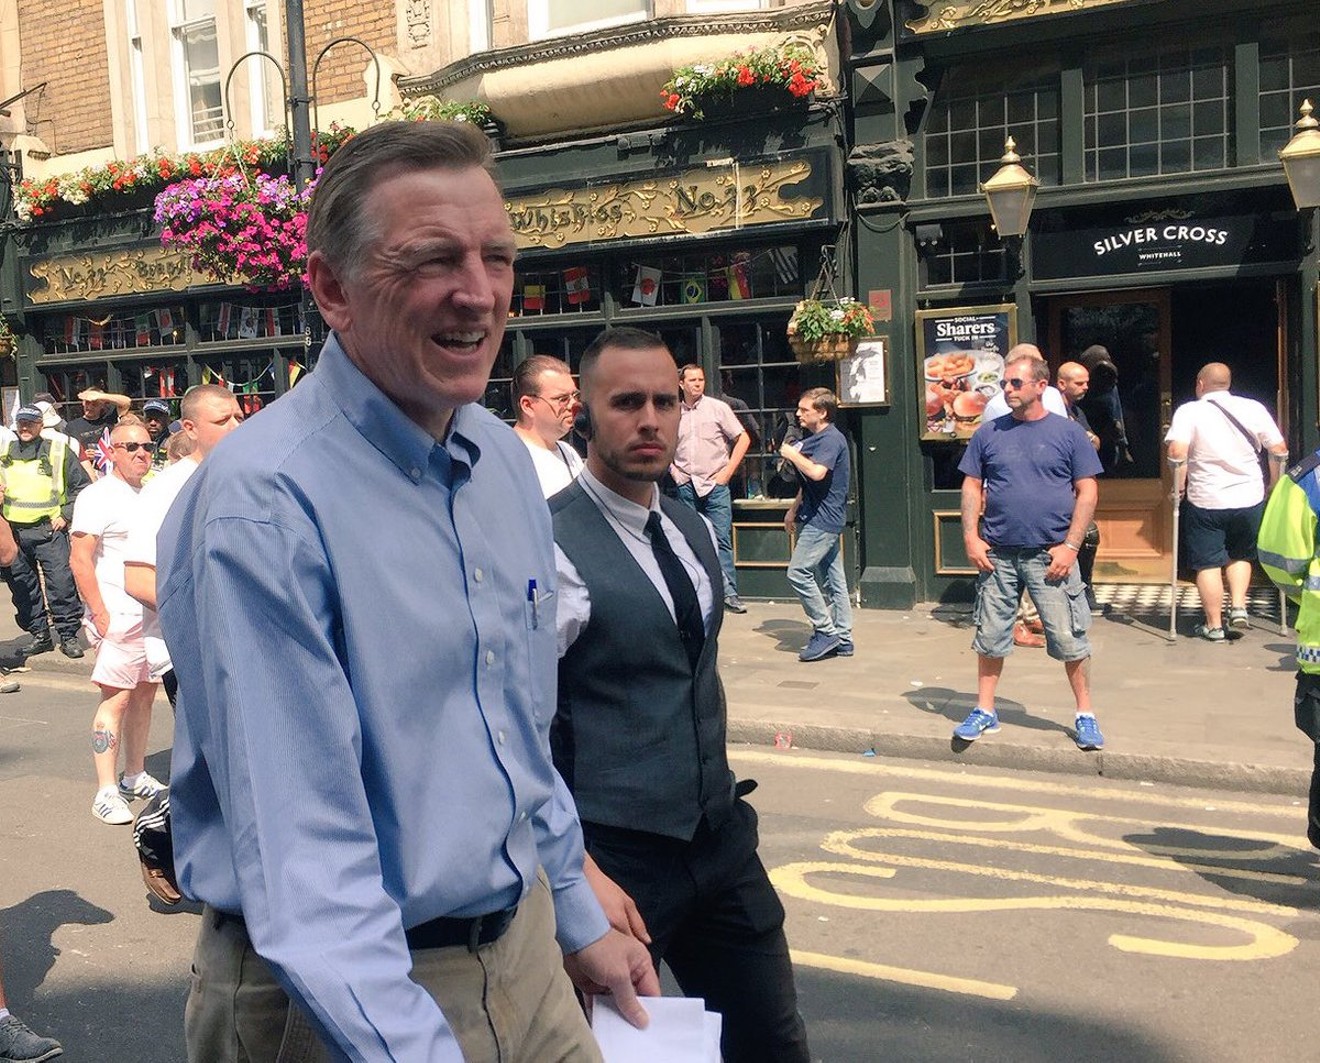 Arizona Congressman Paul Gosar shared this photo from his trip to London on Twitter: "I object to the suppression of the truth," he wrote.